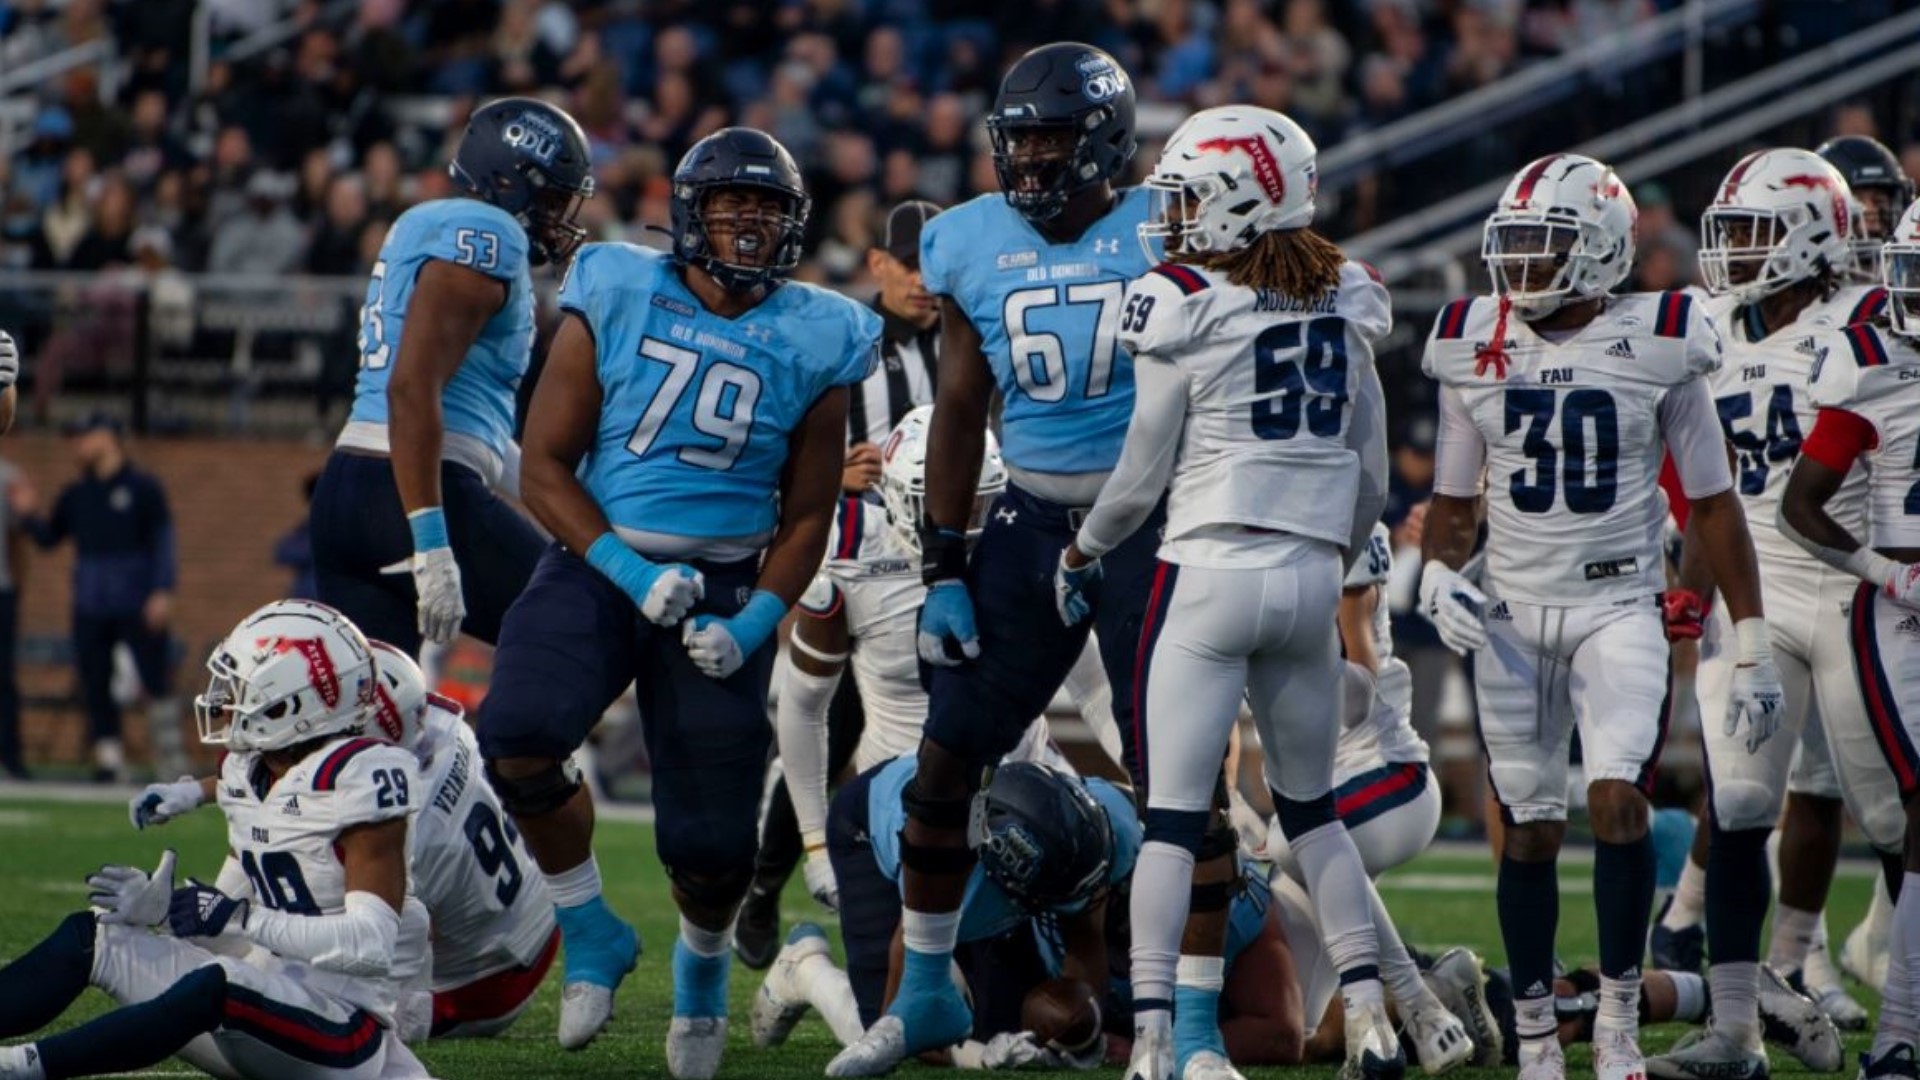 Nick Rice kicked three second-half field goals and Old Dominion scored on two first-half safeties en route to a 30-16 win over Florida Atlantic on Saturday.